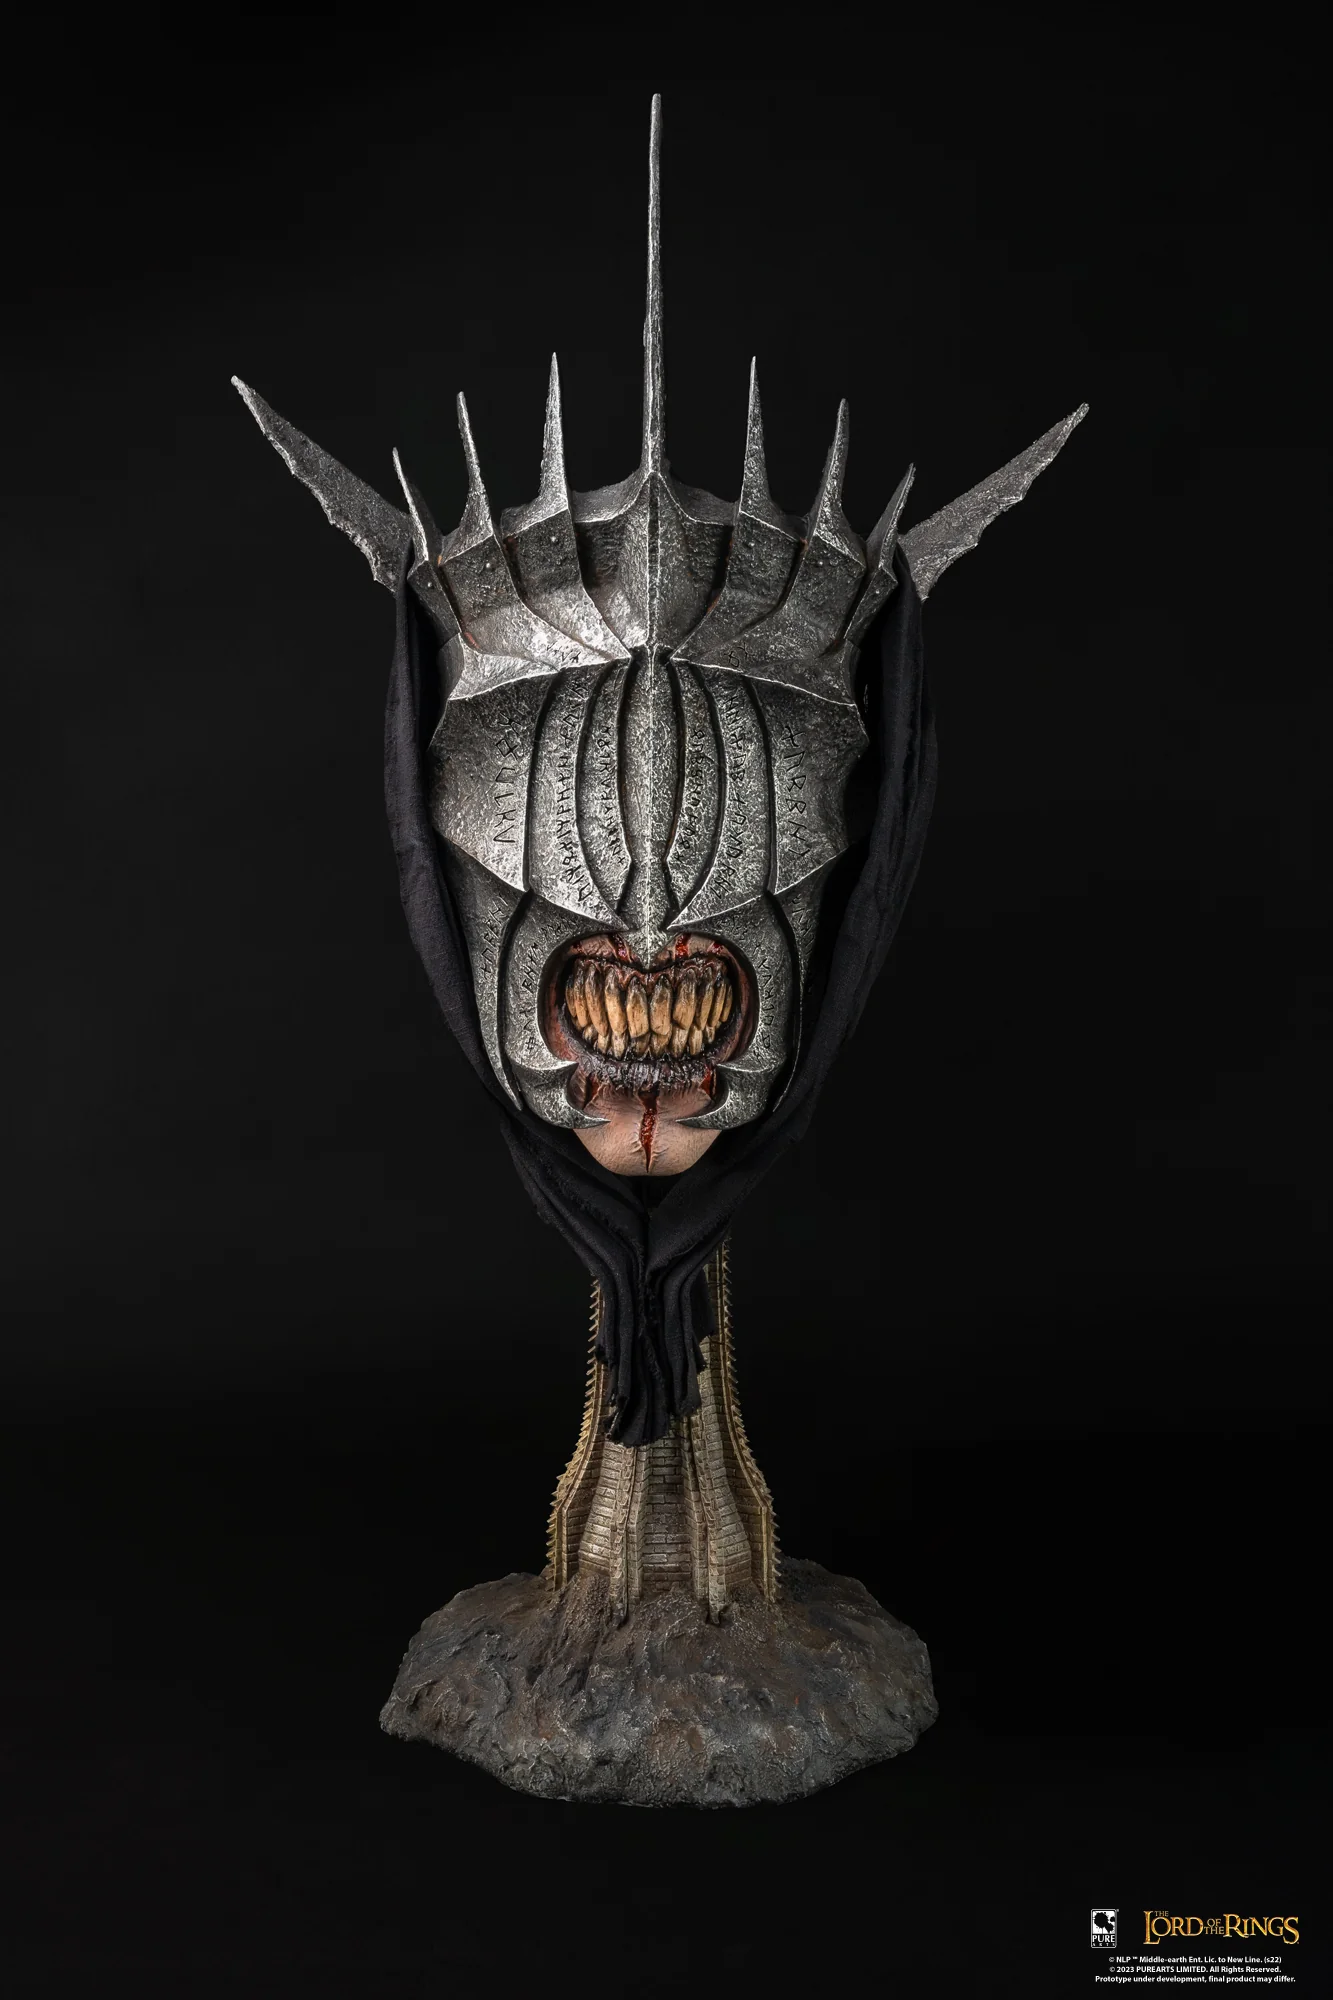 The Lord of the Rings MOUTH OF SAURON LIFE-SIZE ART MASK